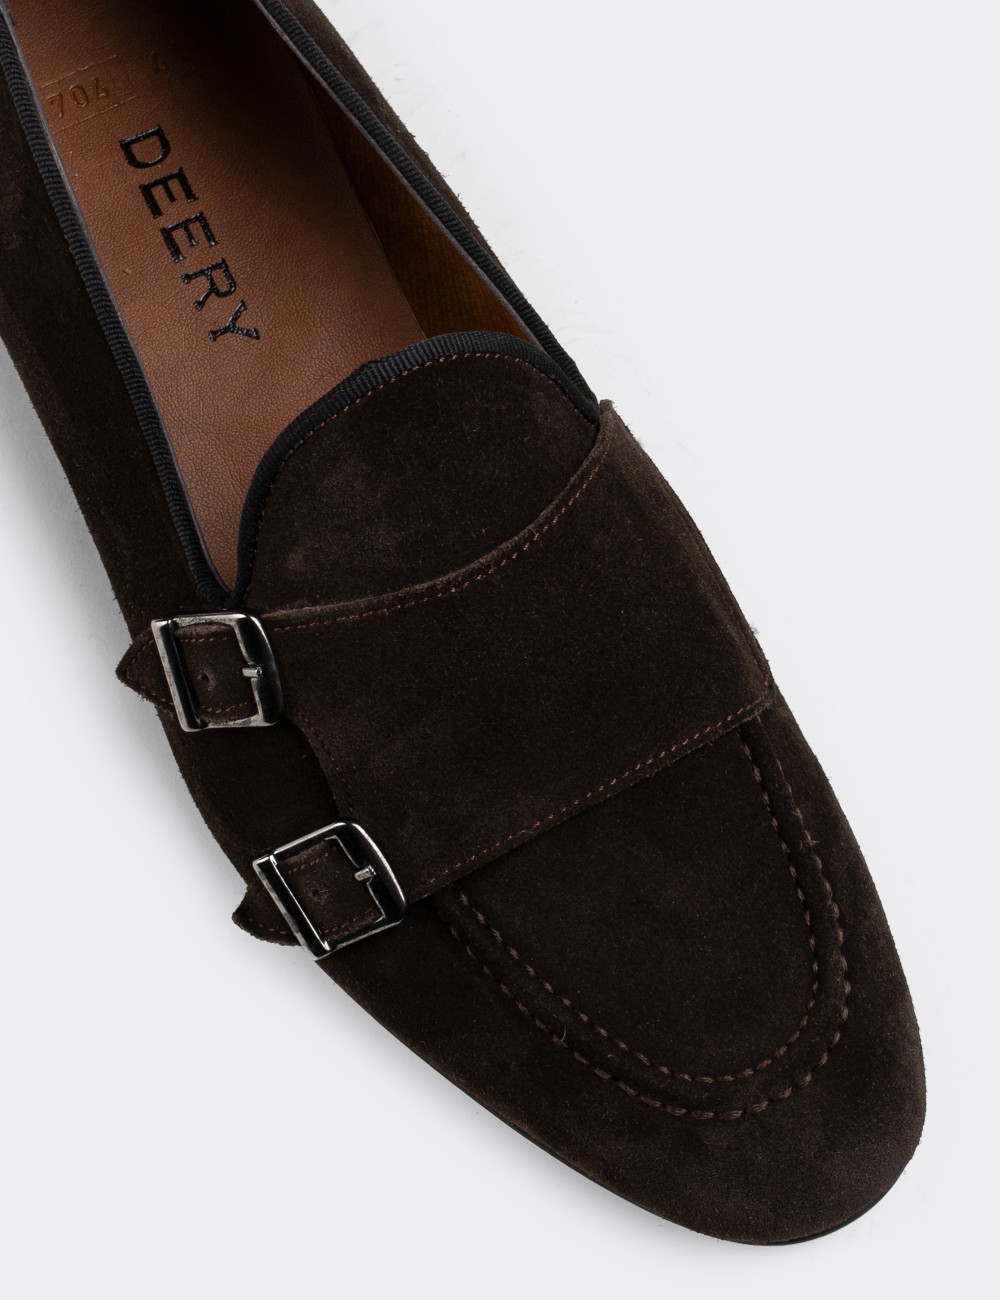 Brown Suede Leather Monk-Strap Loafers - 01704MKHVC04